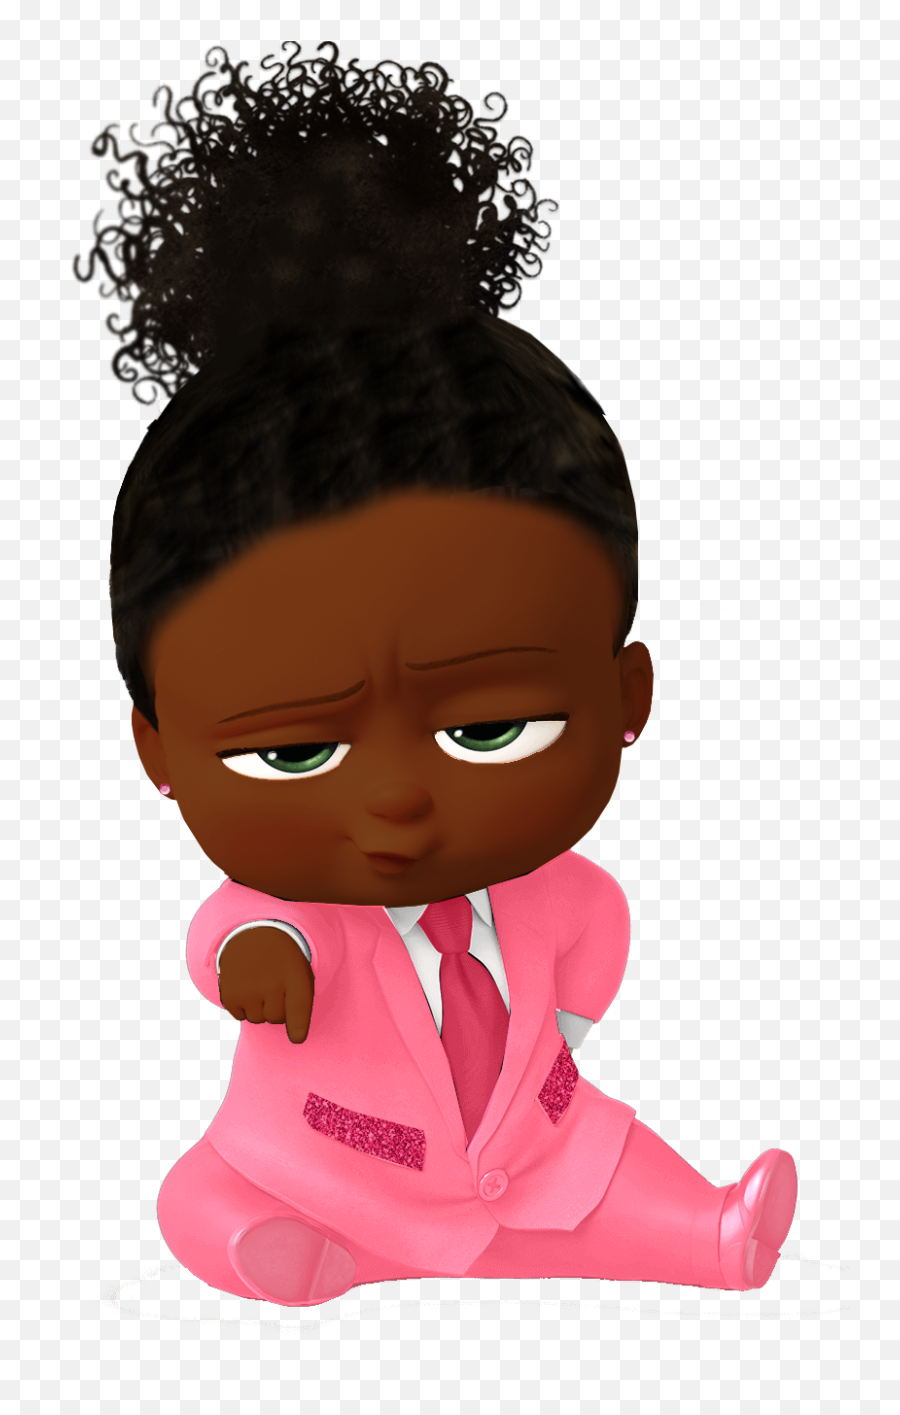 Black Girl Boss Baby Png Image With No - Boss Baby Girl Transparent Background Emoji,Boss Baby Png